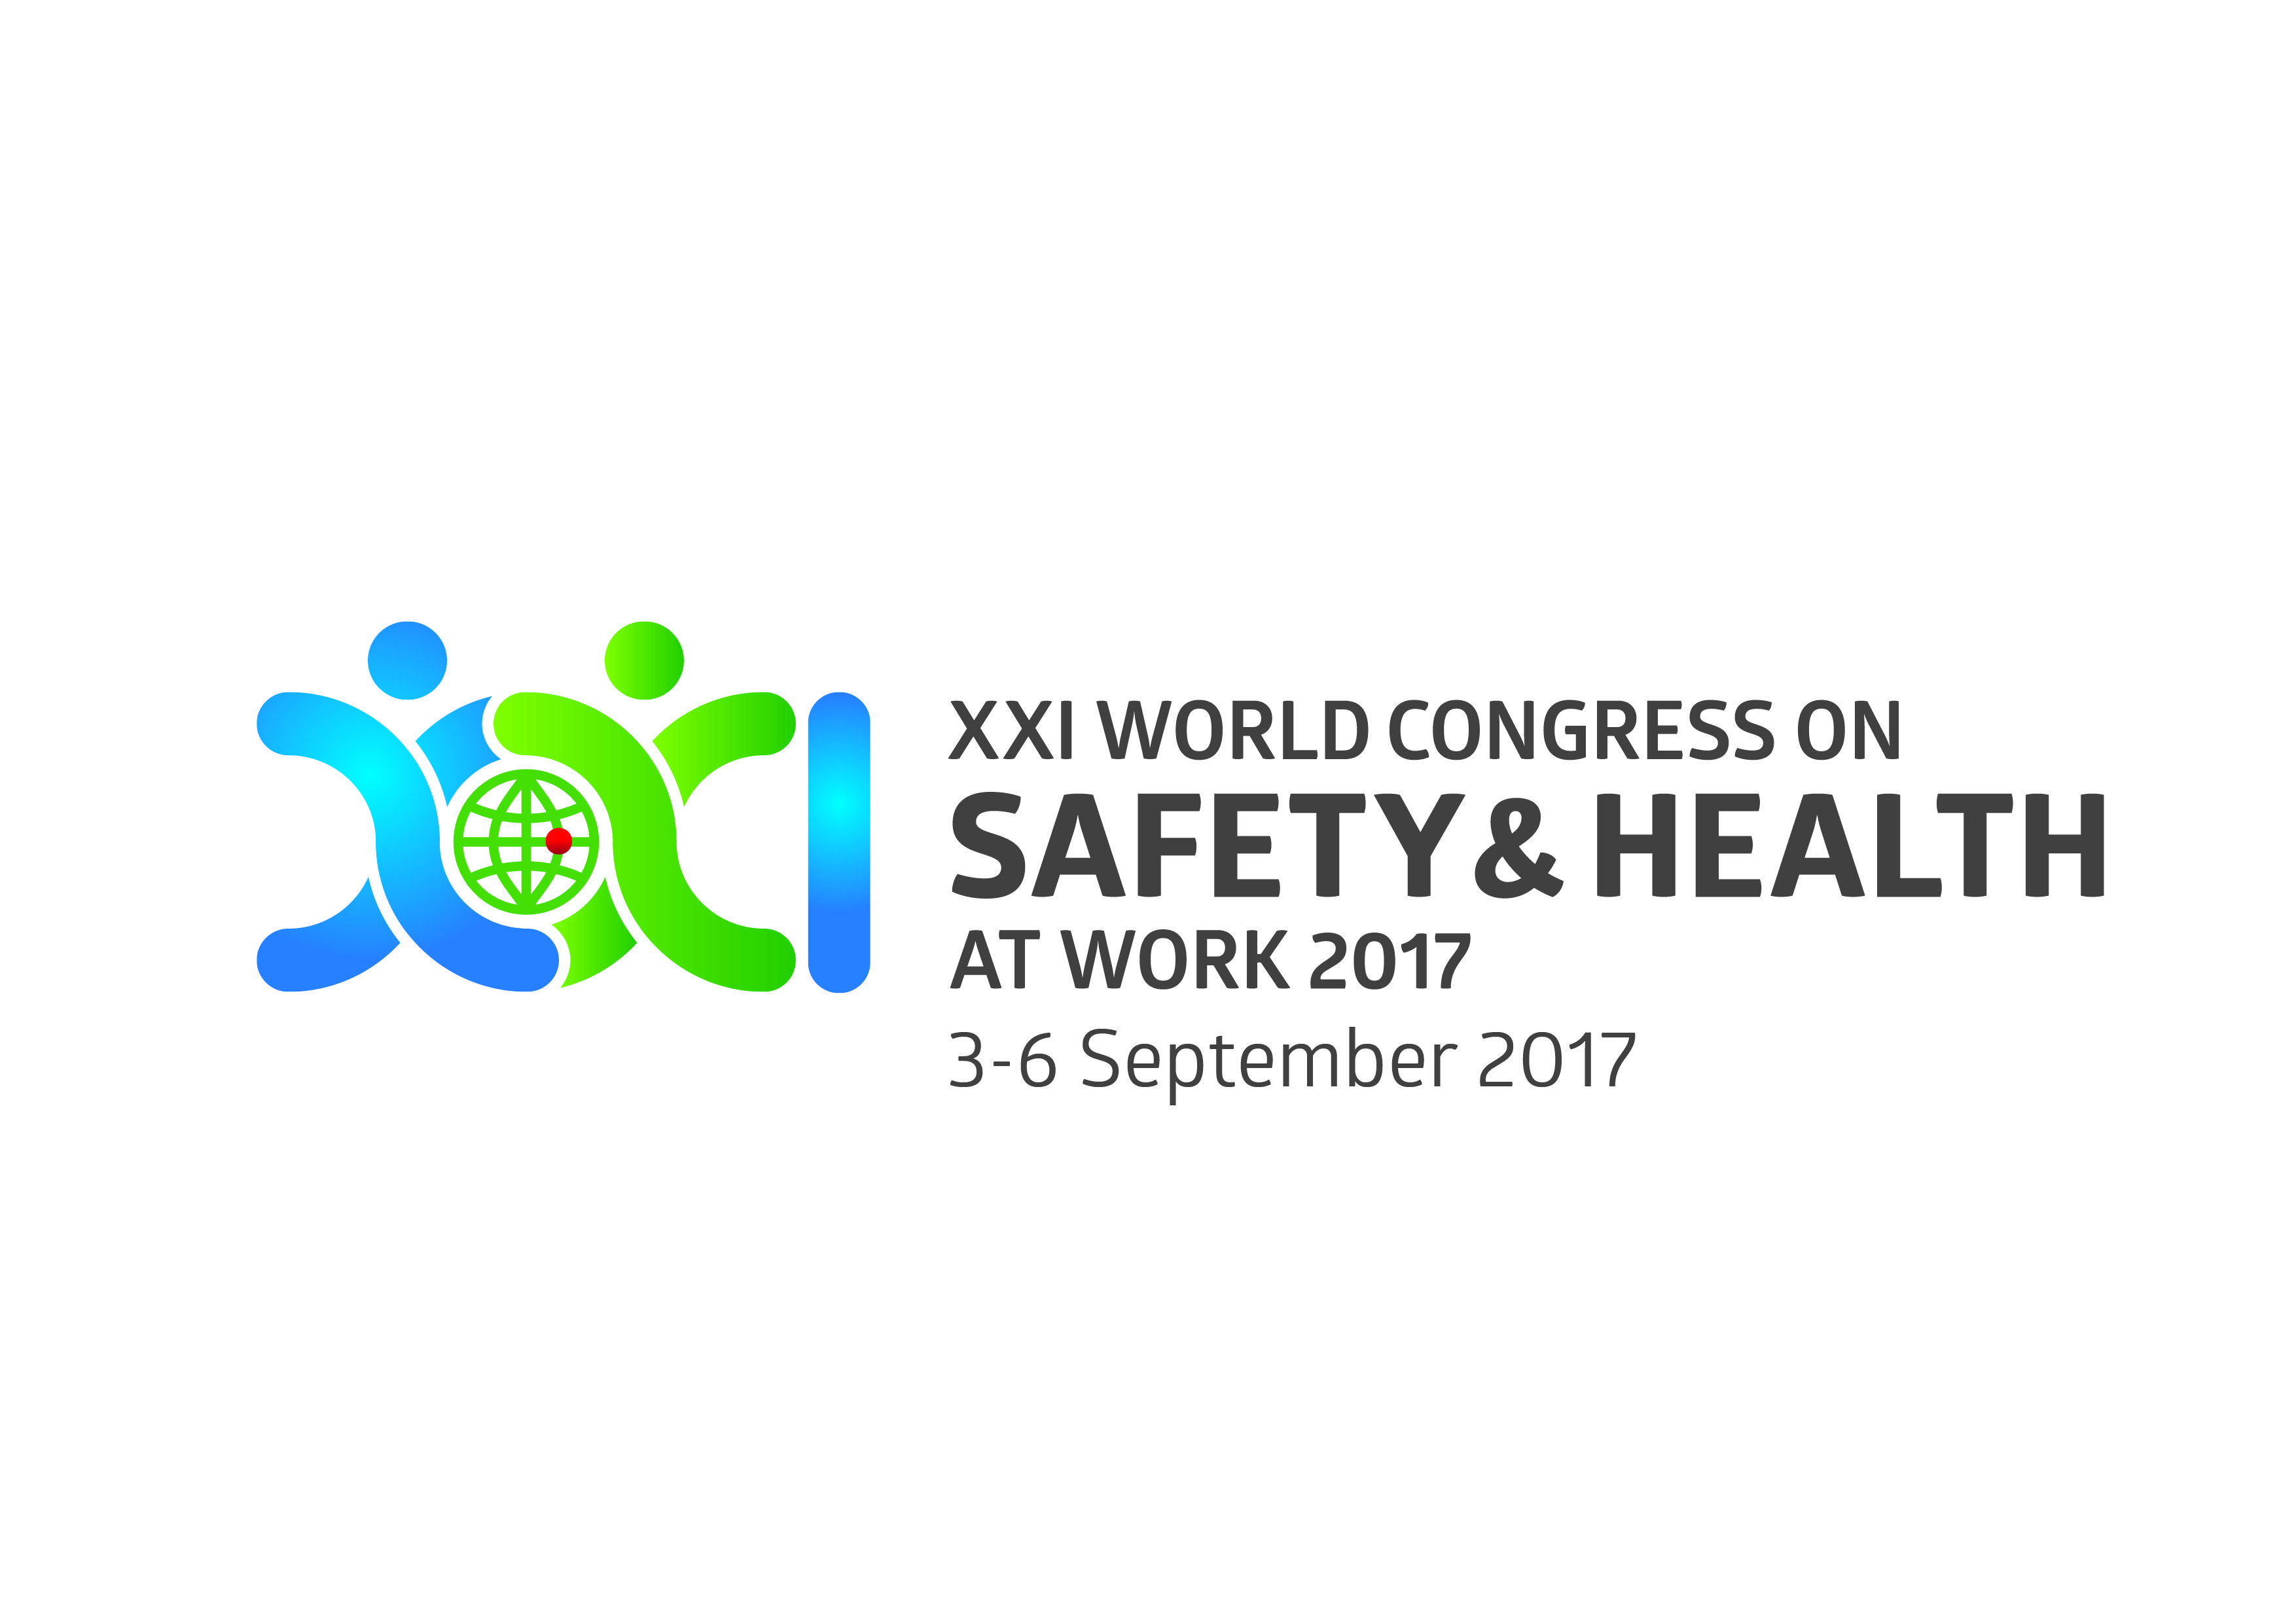 XXI Logo - VPPPA Supports the XXI World Congress on Safety and Health at Work